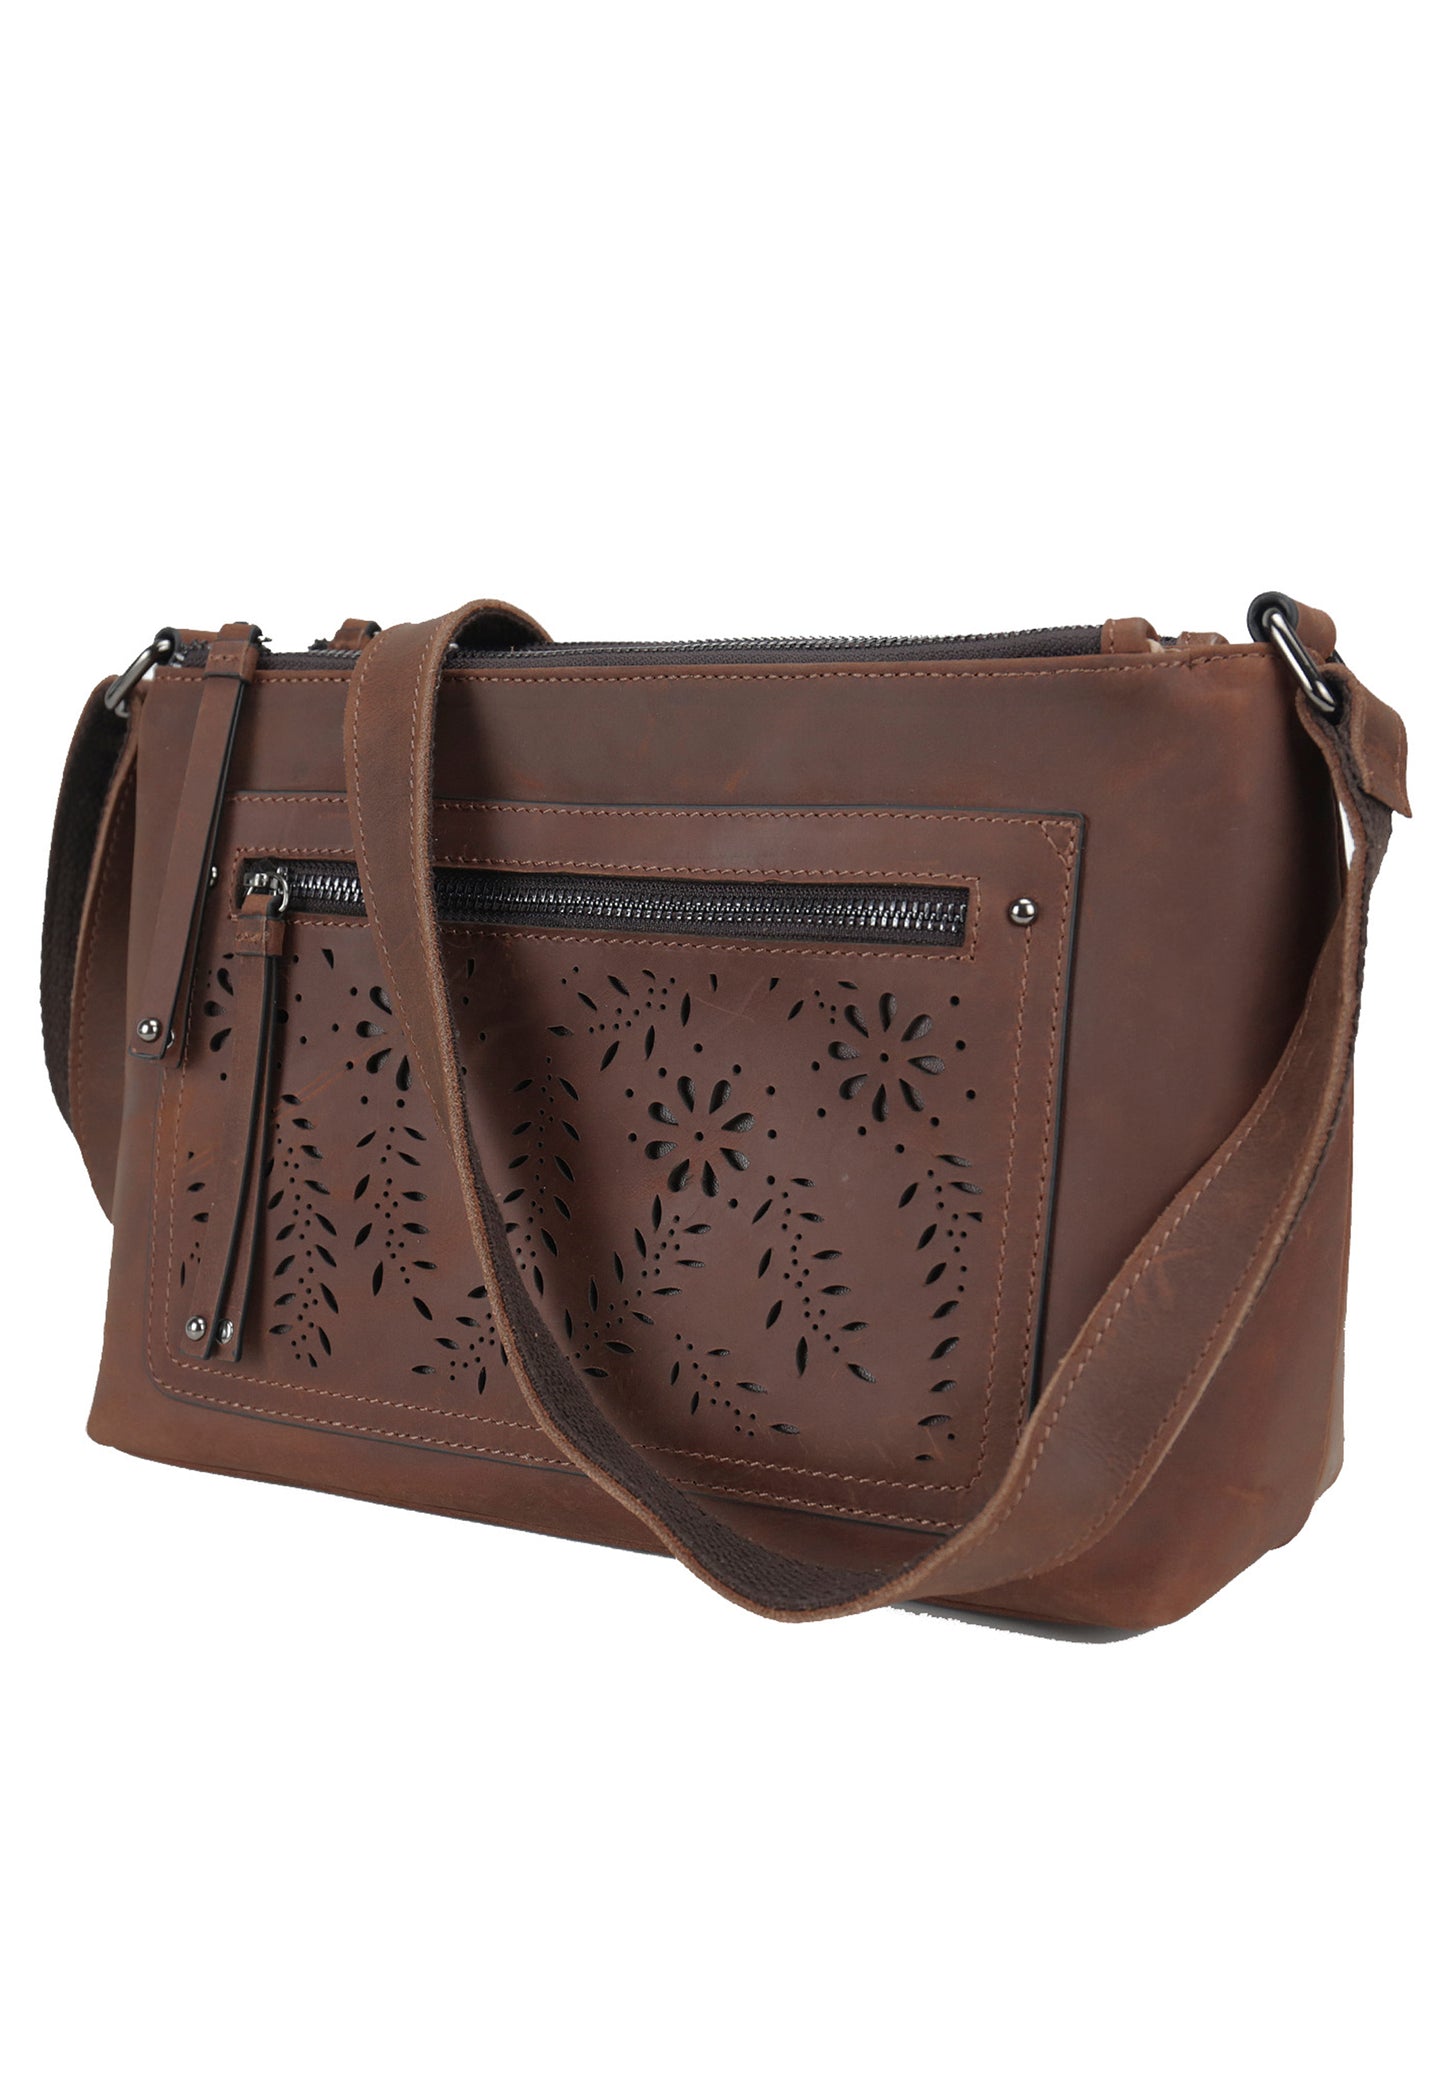 top grain leather concealed carry purse for ladies